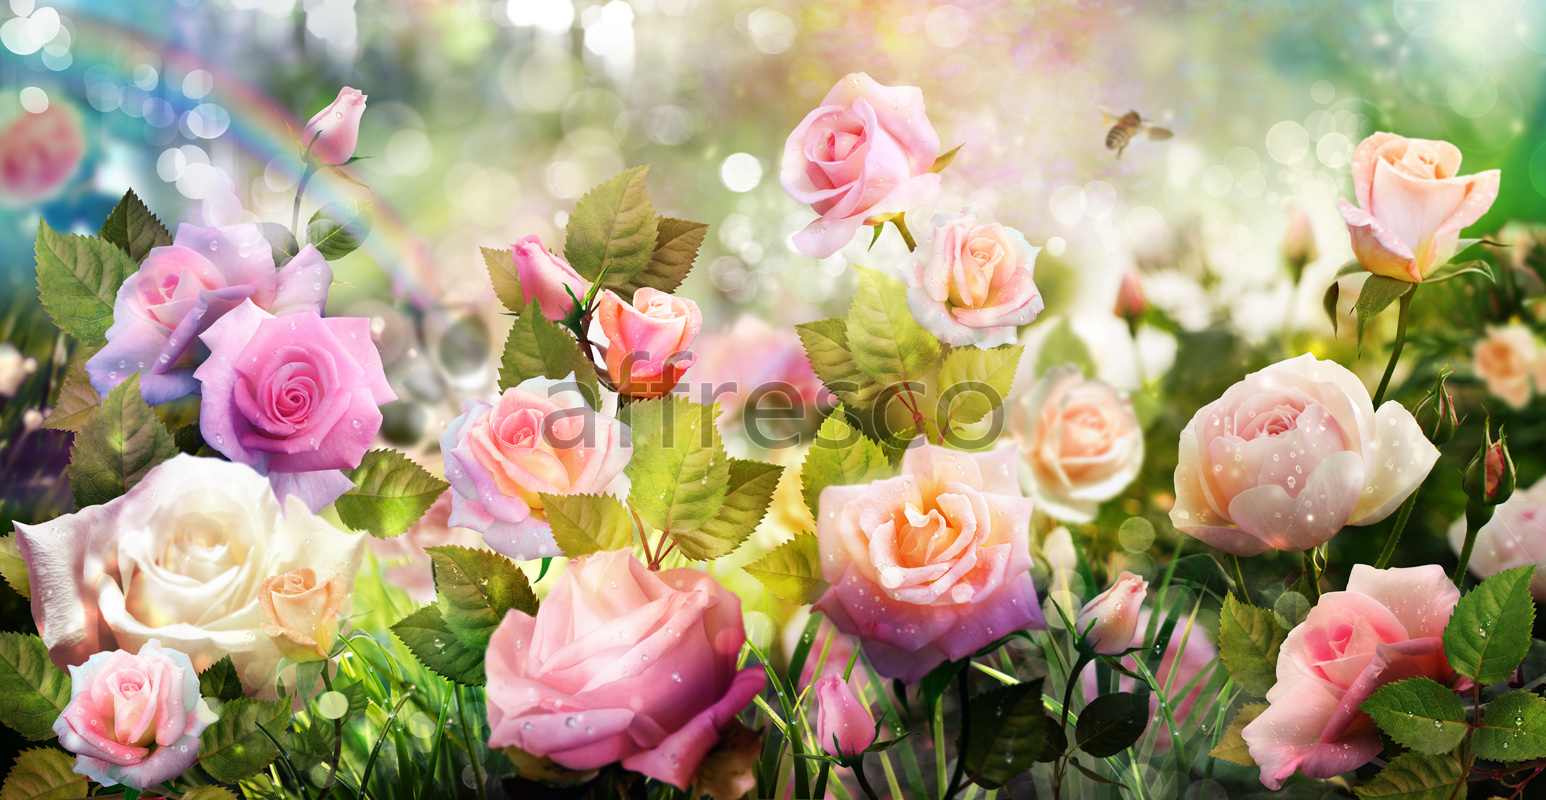 7145 | Flowers | garden with roses | Affresco Factory